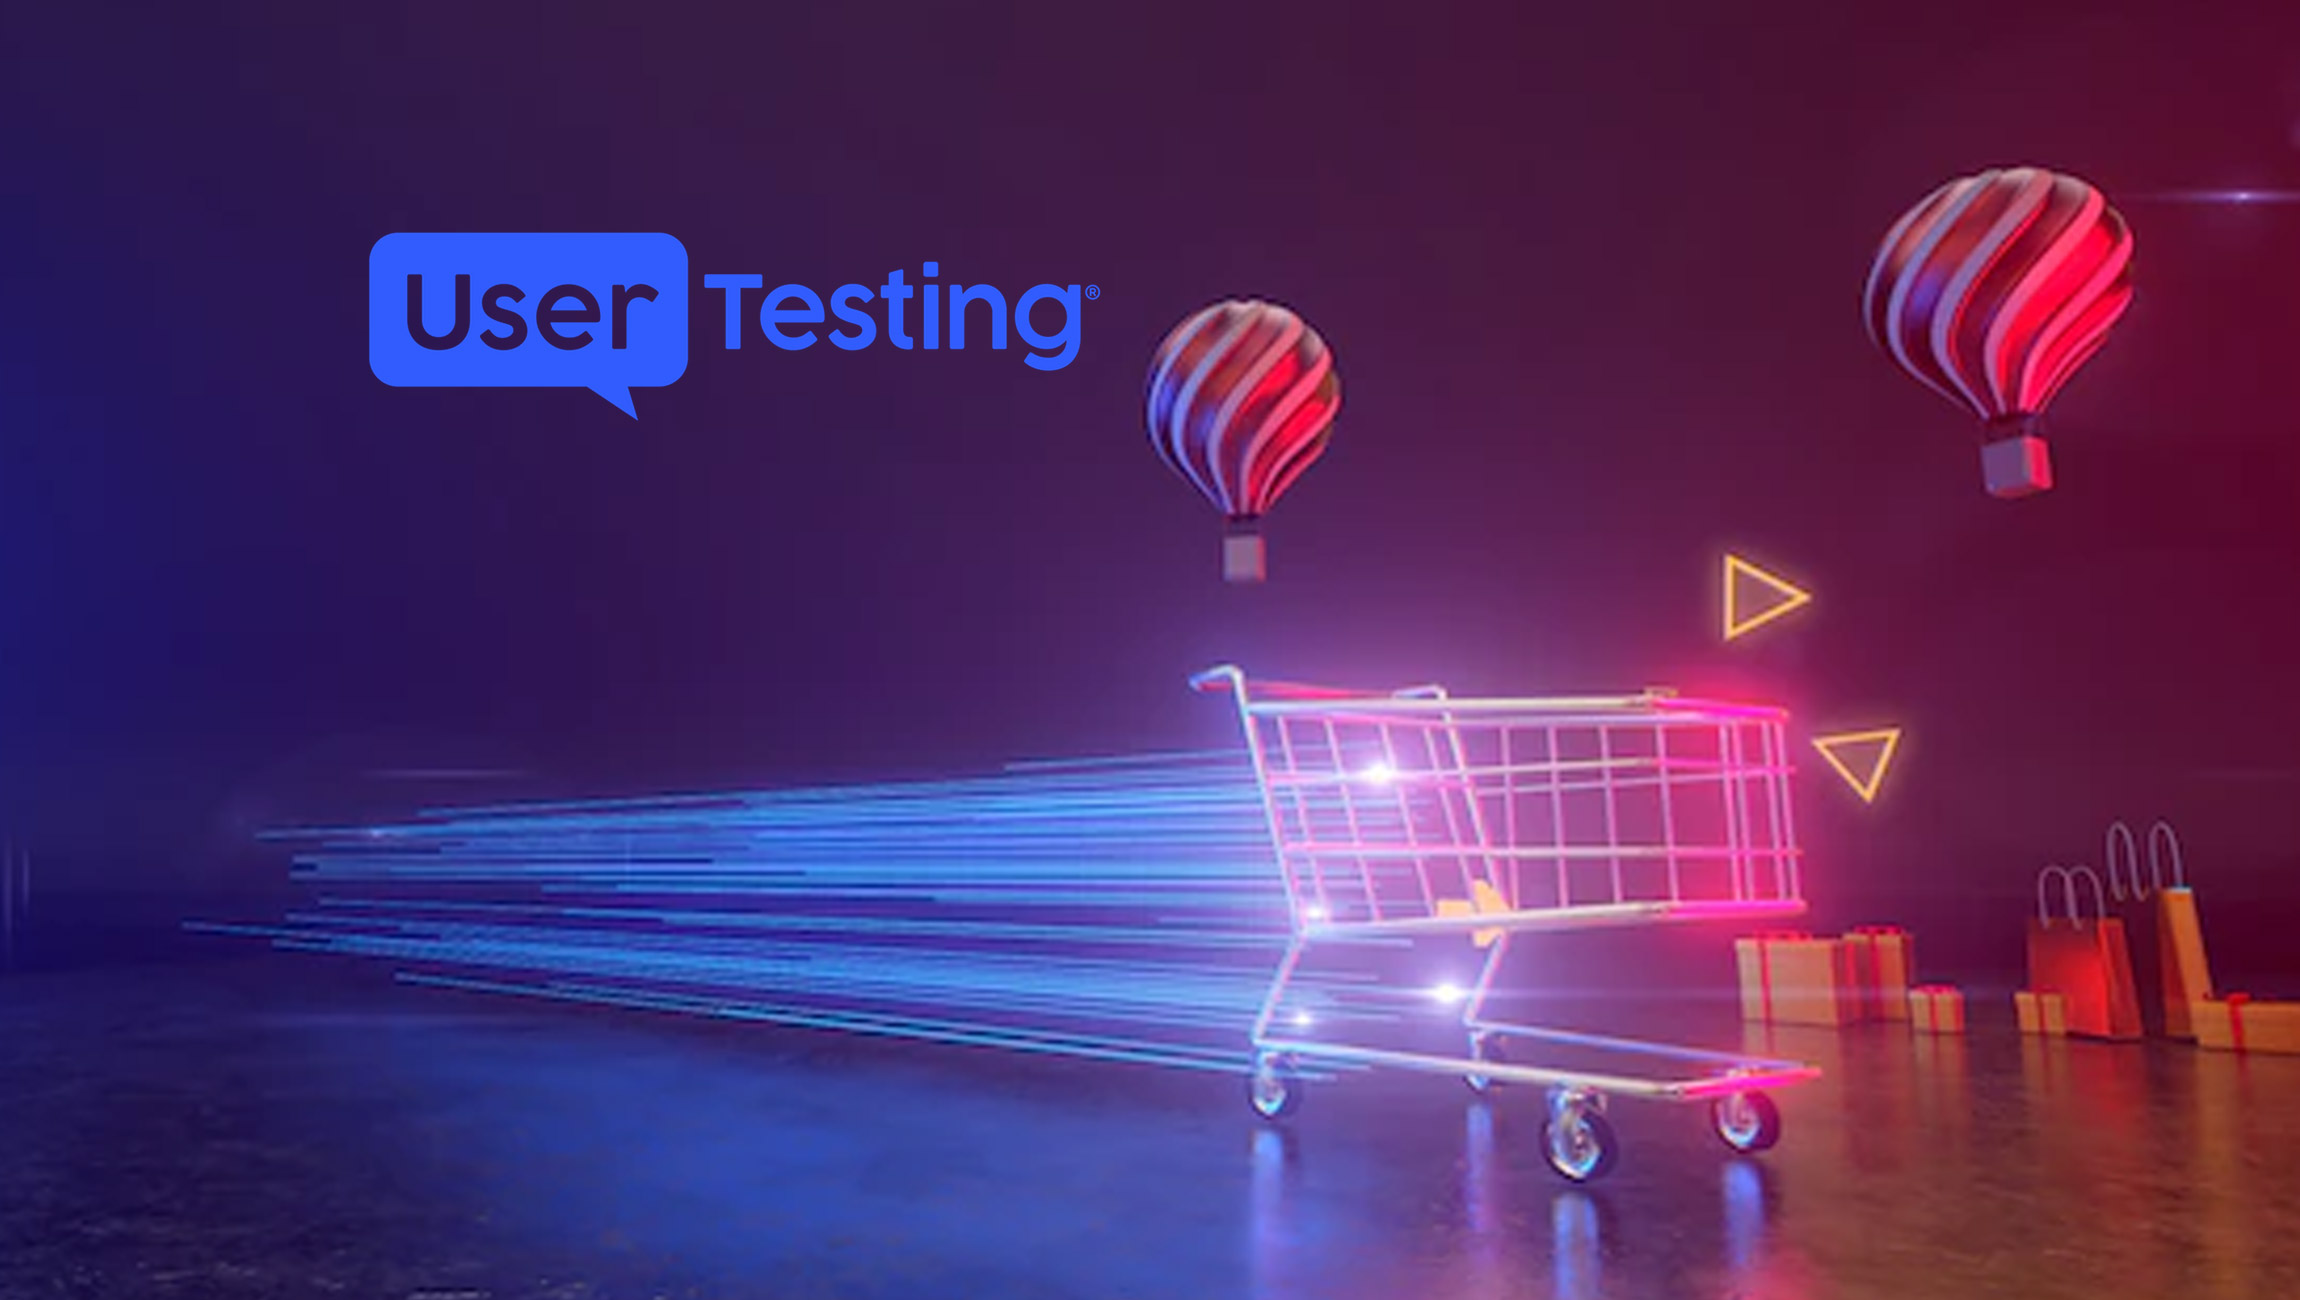 UserTesting India Accredited As The Best UX in Ecommerce At India E-Commerce Summit